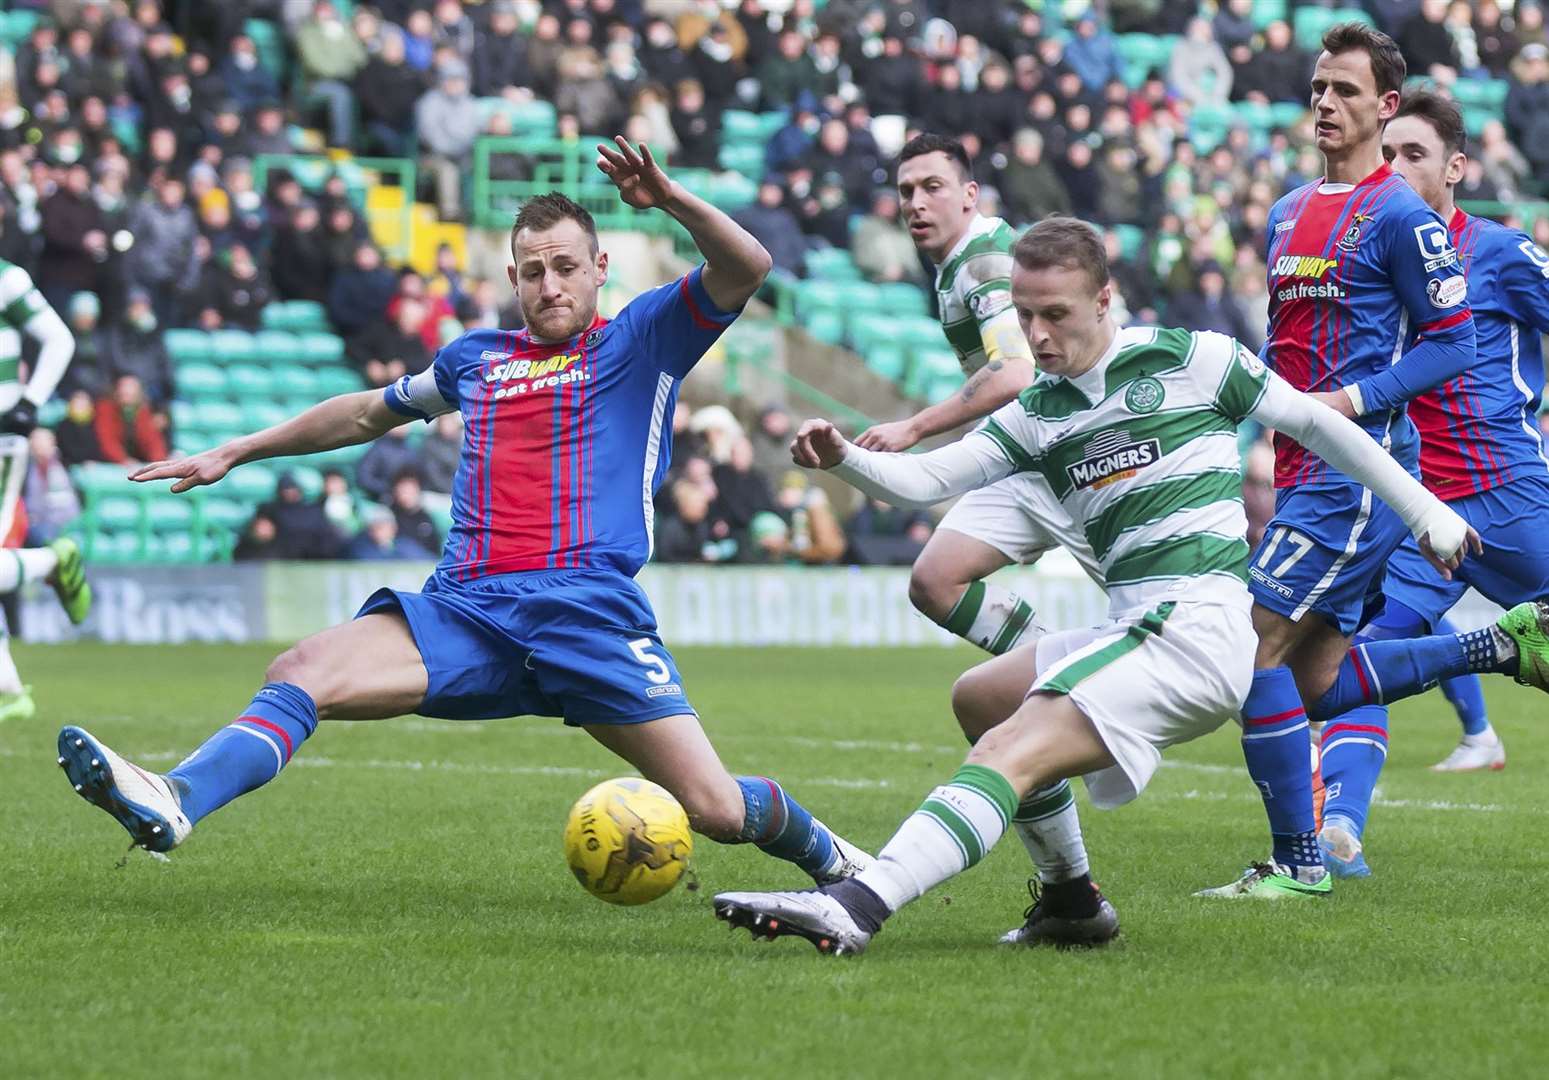 Picture - Ken Macpherson, Inverness. Celtic(3) v Inverness CT(0). 20.02.16. ICT's Gary Warren blocks this shot from Celtic striker Leigh Griffiths.